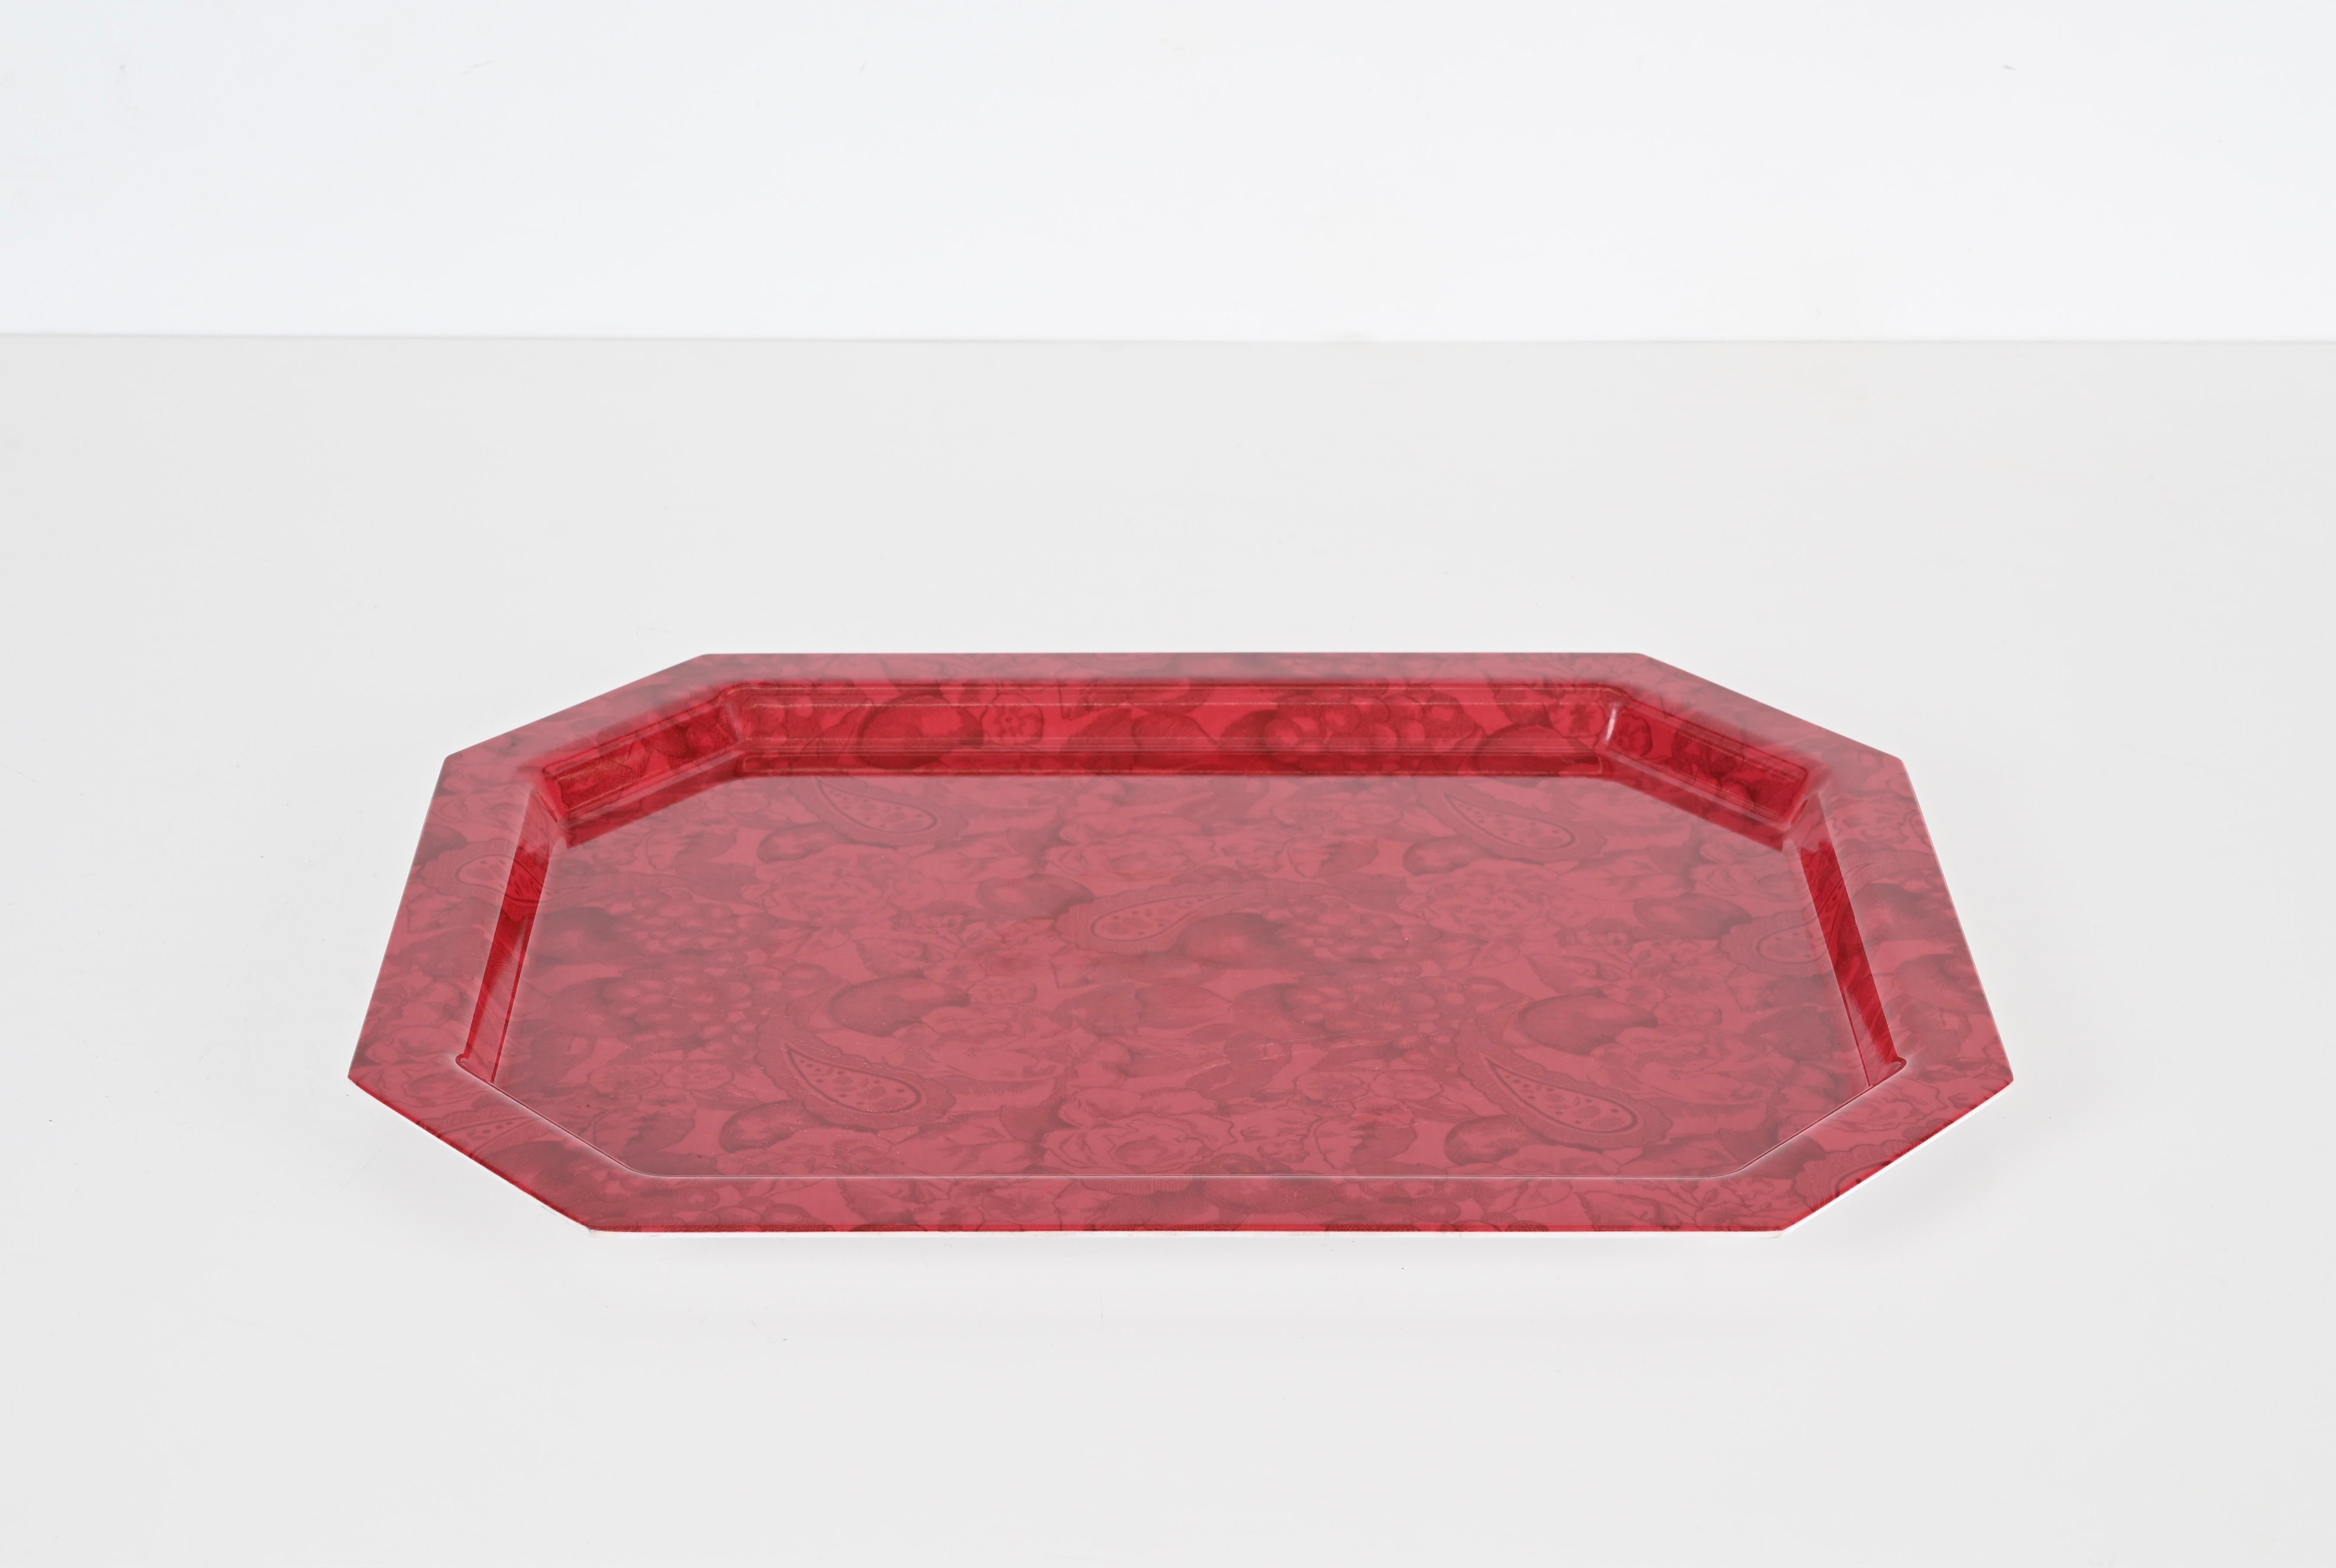 Beautiful red octagonal serving tray in red acrylic. This lovely centerpiece was made in Italy in the 80s.

The tray is made in a beautiful vibrant red acrylic that features cachemire decorations. 

A stunning serving piece that will complement a